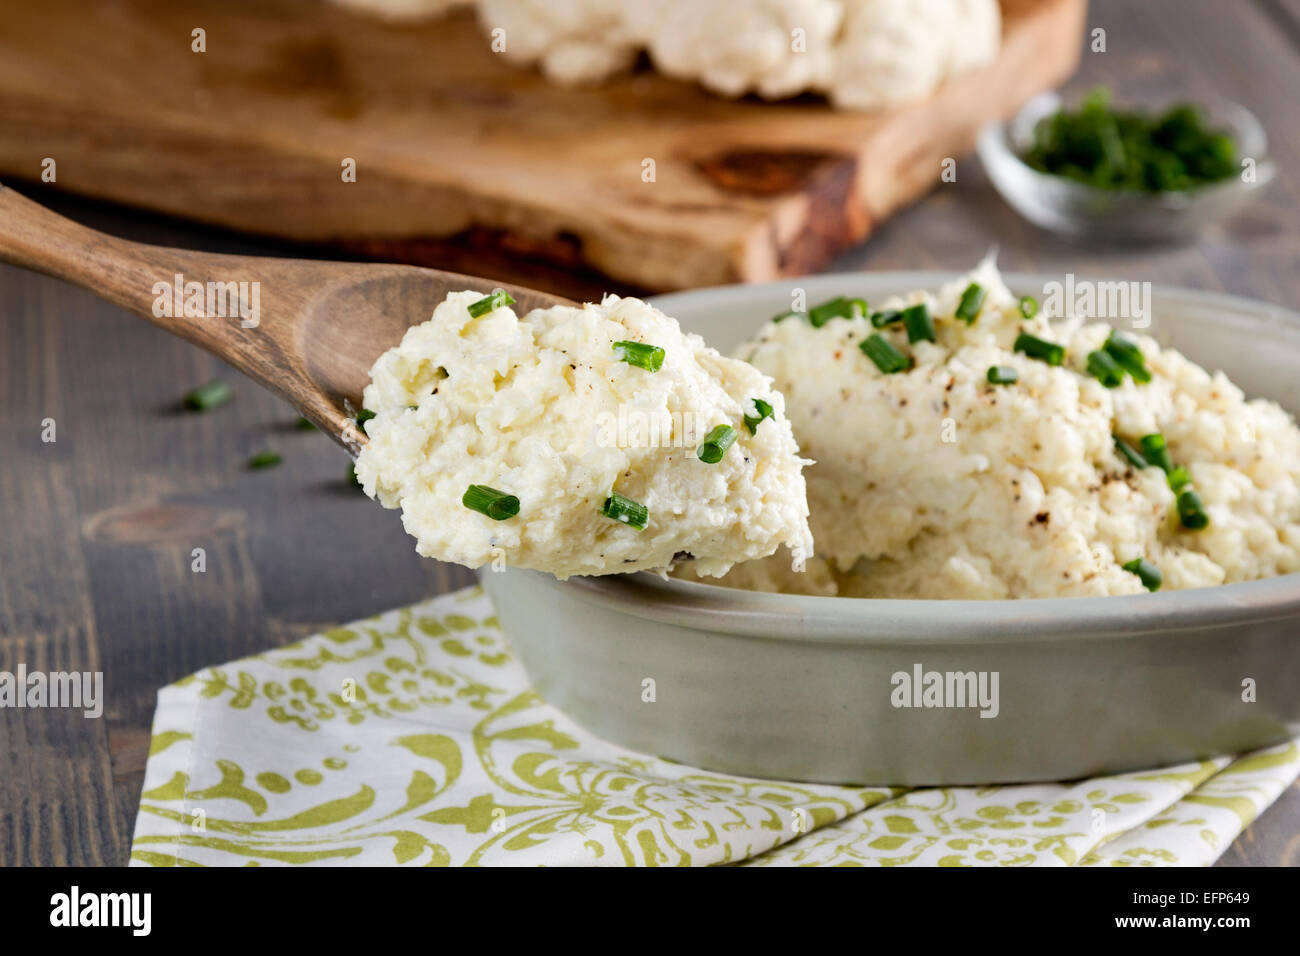 Mashed Cauliflower recipe prepared as a low carb alternative to mashed potatoes Stock Photo